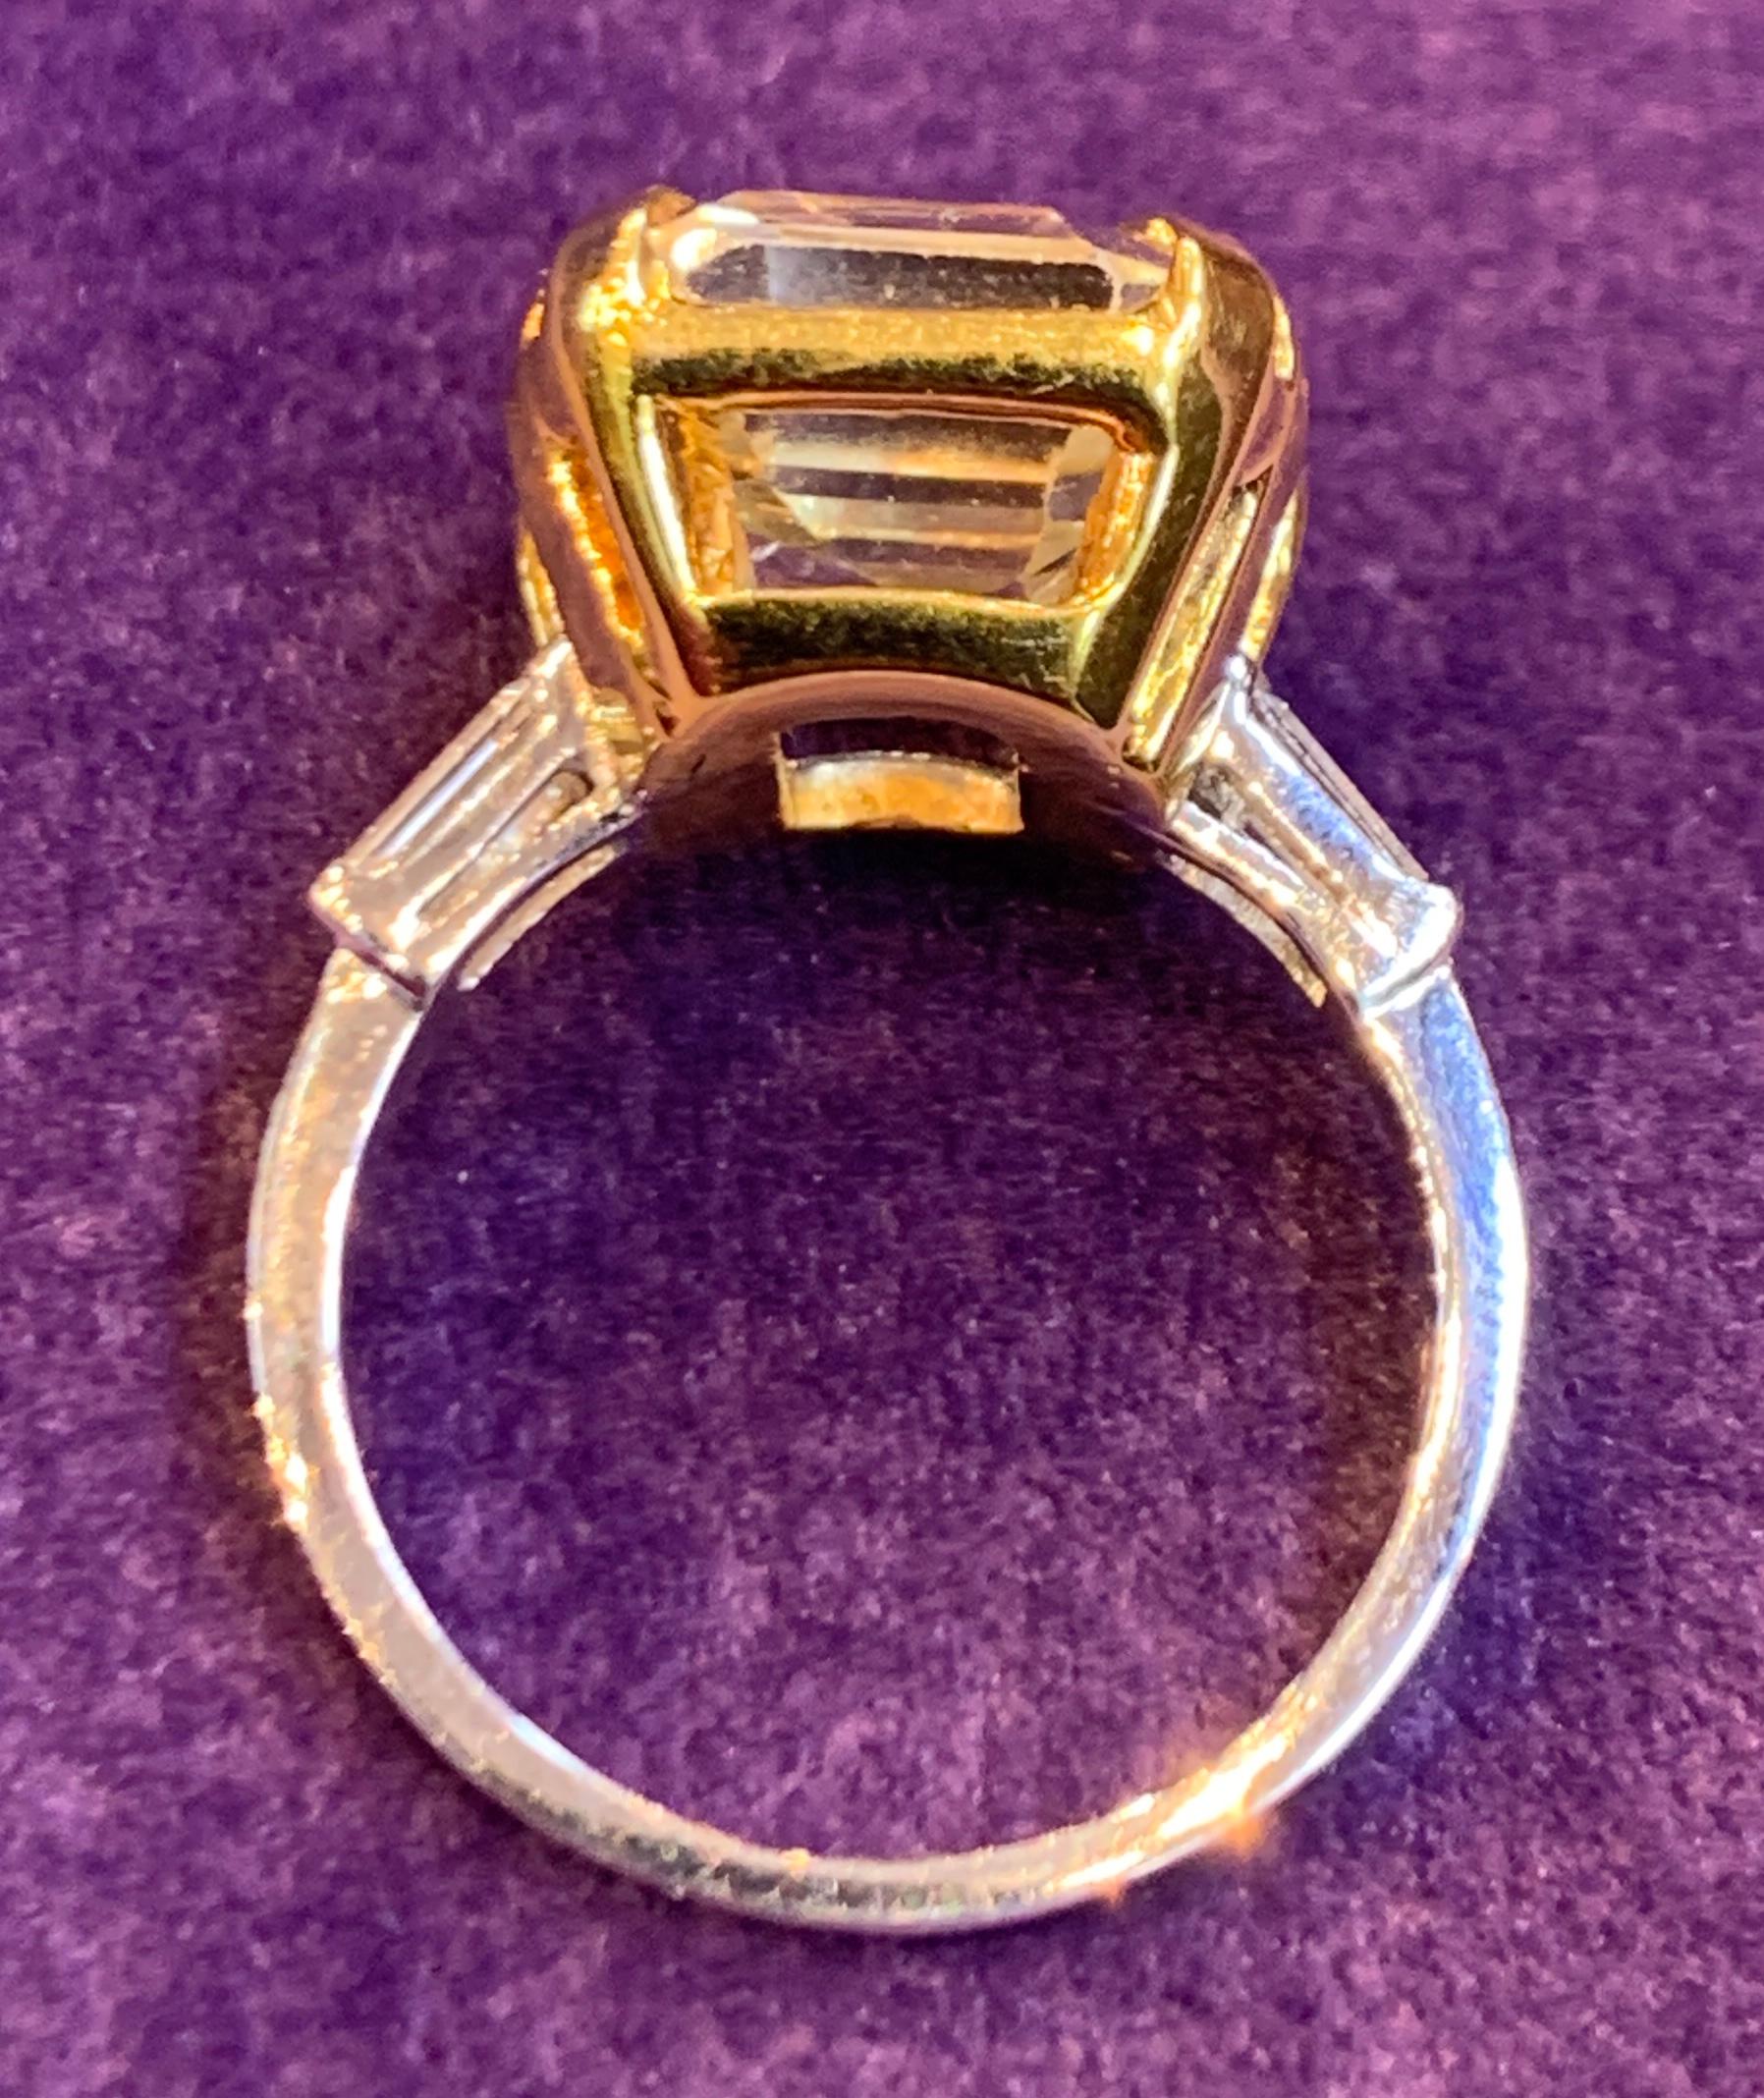 Yellow Sapphire Ring set in Platinum & 18K Yellow Gold 
Sapphire Weight approximately 5 carats
Ring Size: 6.5
Resizable free of charge 
